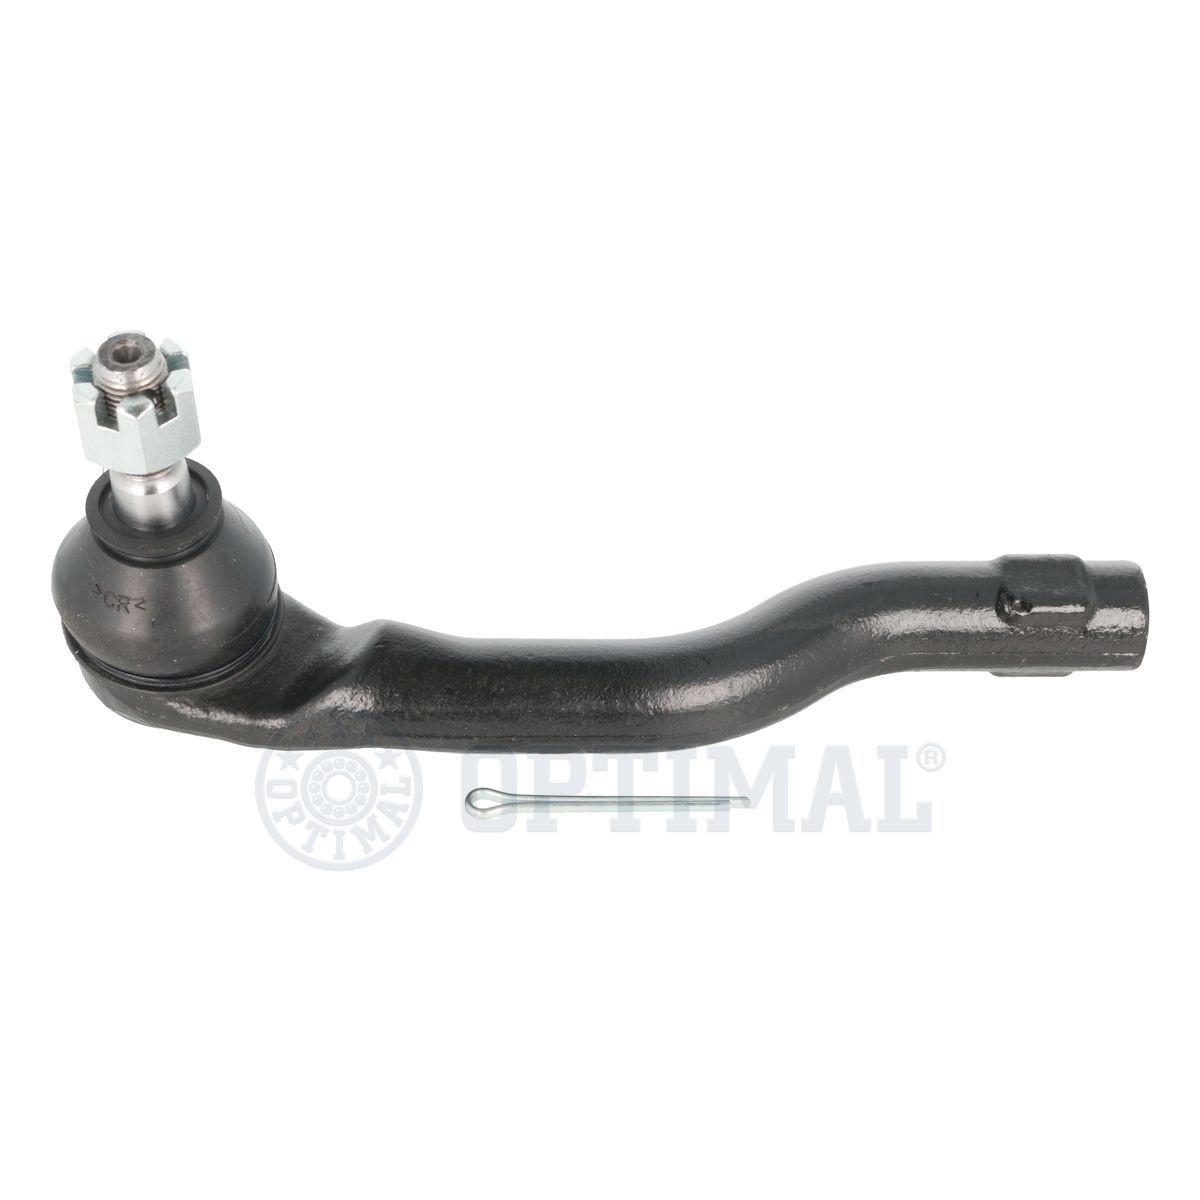 OPTIMAL G1-1533 Track rod end Cone Size 12,8 mm, M12 x 1,25 RHT M mm, Front Axle Right, outer